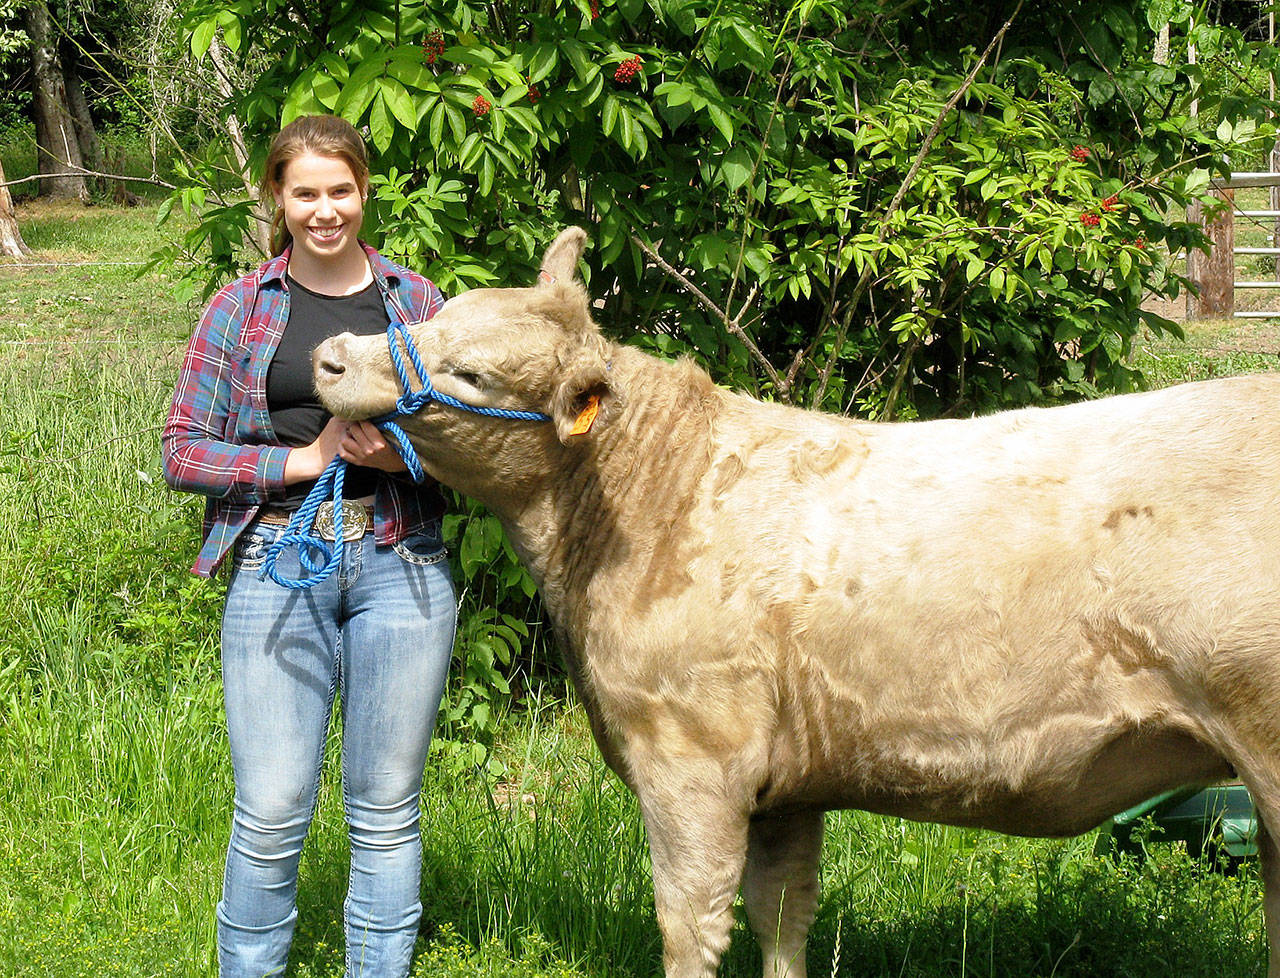 Photo by Dave Felice / Whidbey News Group                                Samantha Ollis leads her cow, Daisy, which she will show at the Whidbey Island Fair.